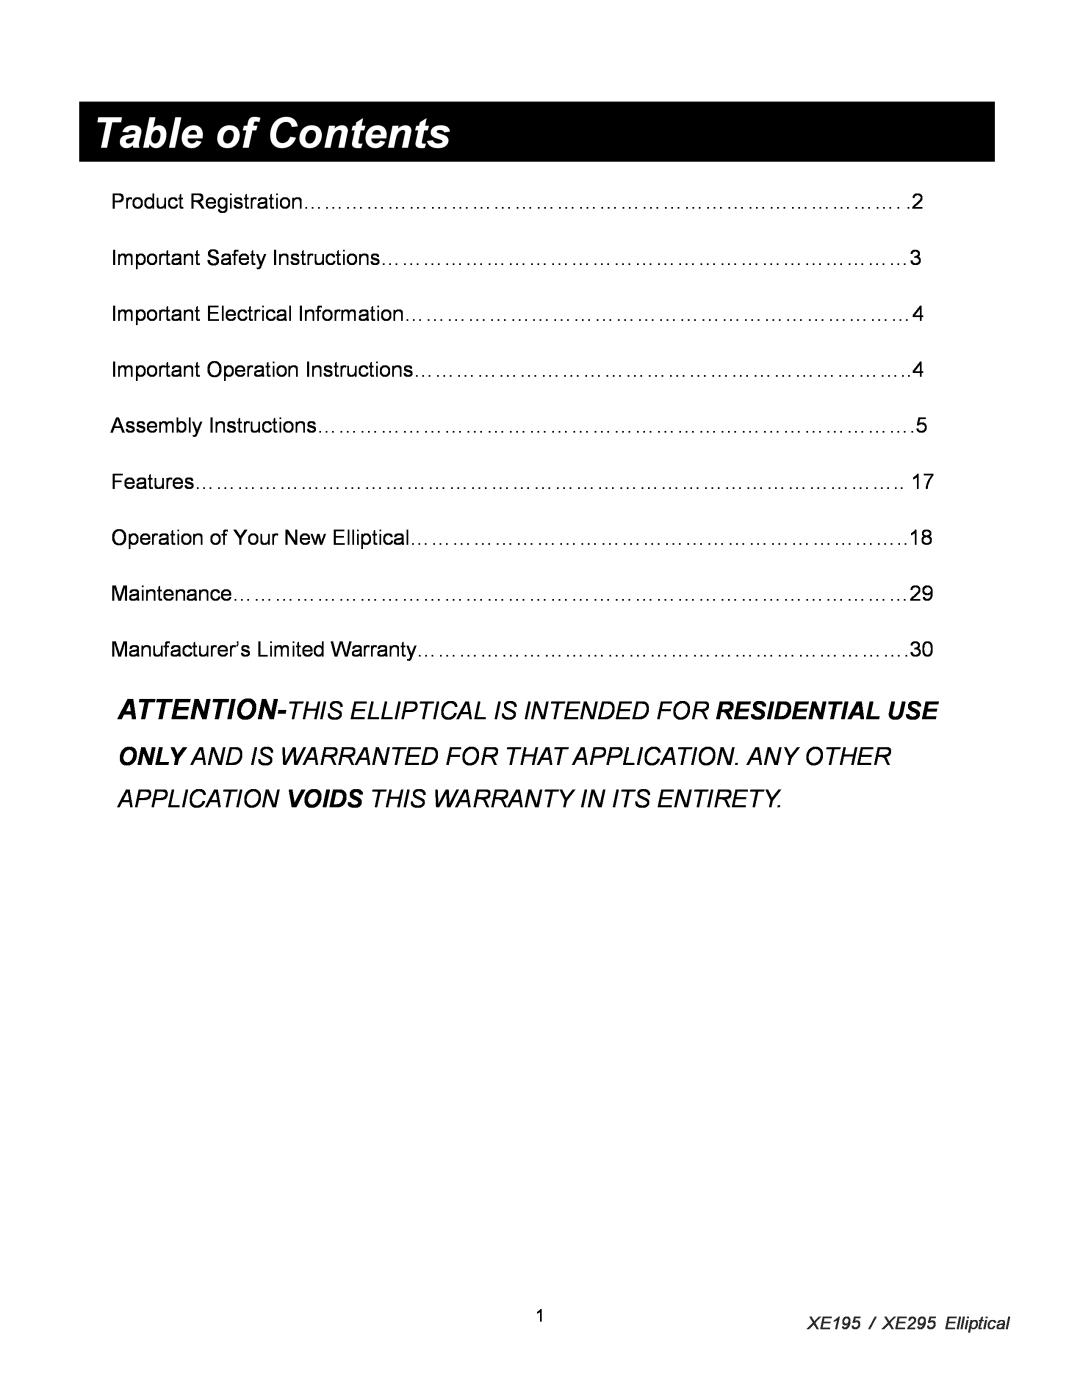 Spirit XE 295, XE 195 owner manual Table of Contents 